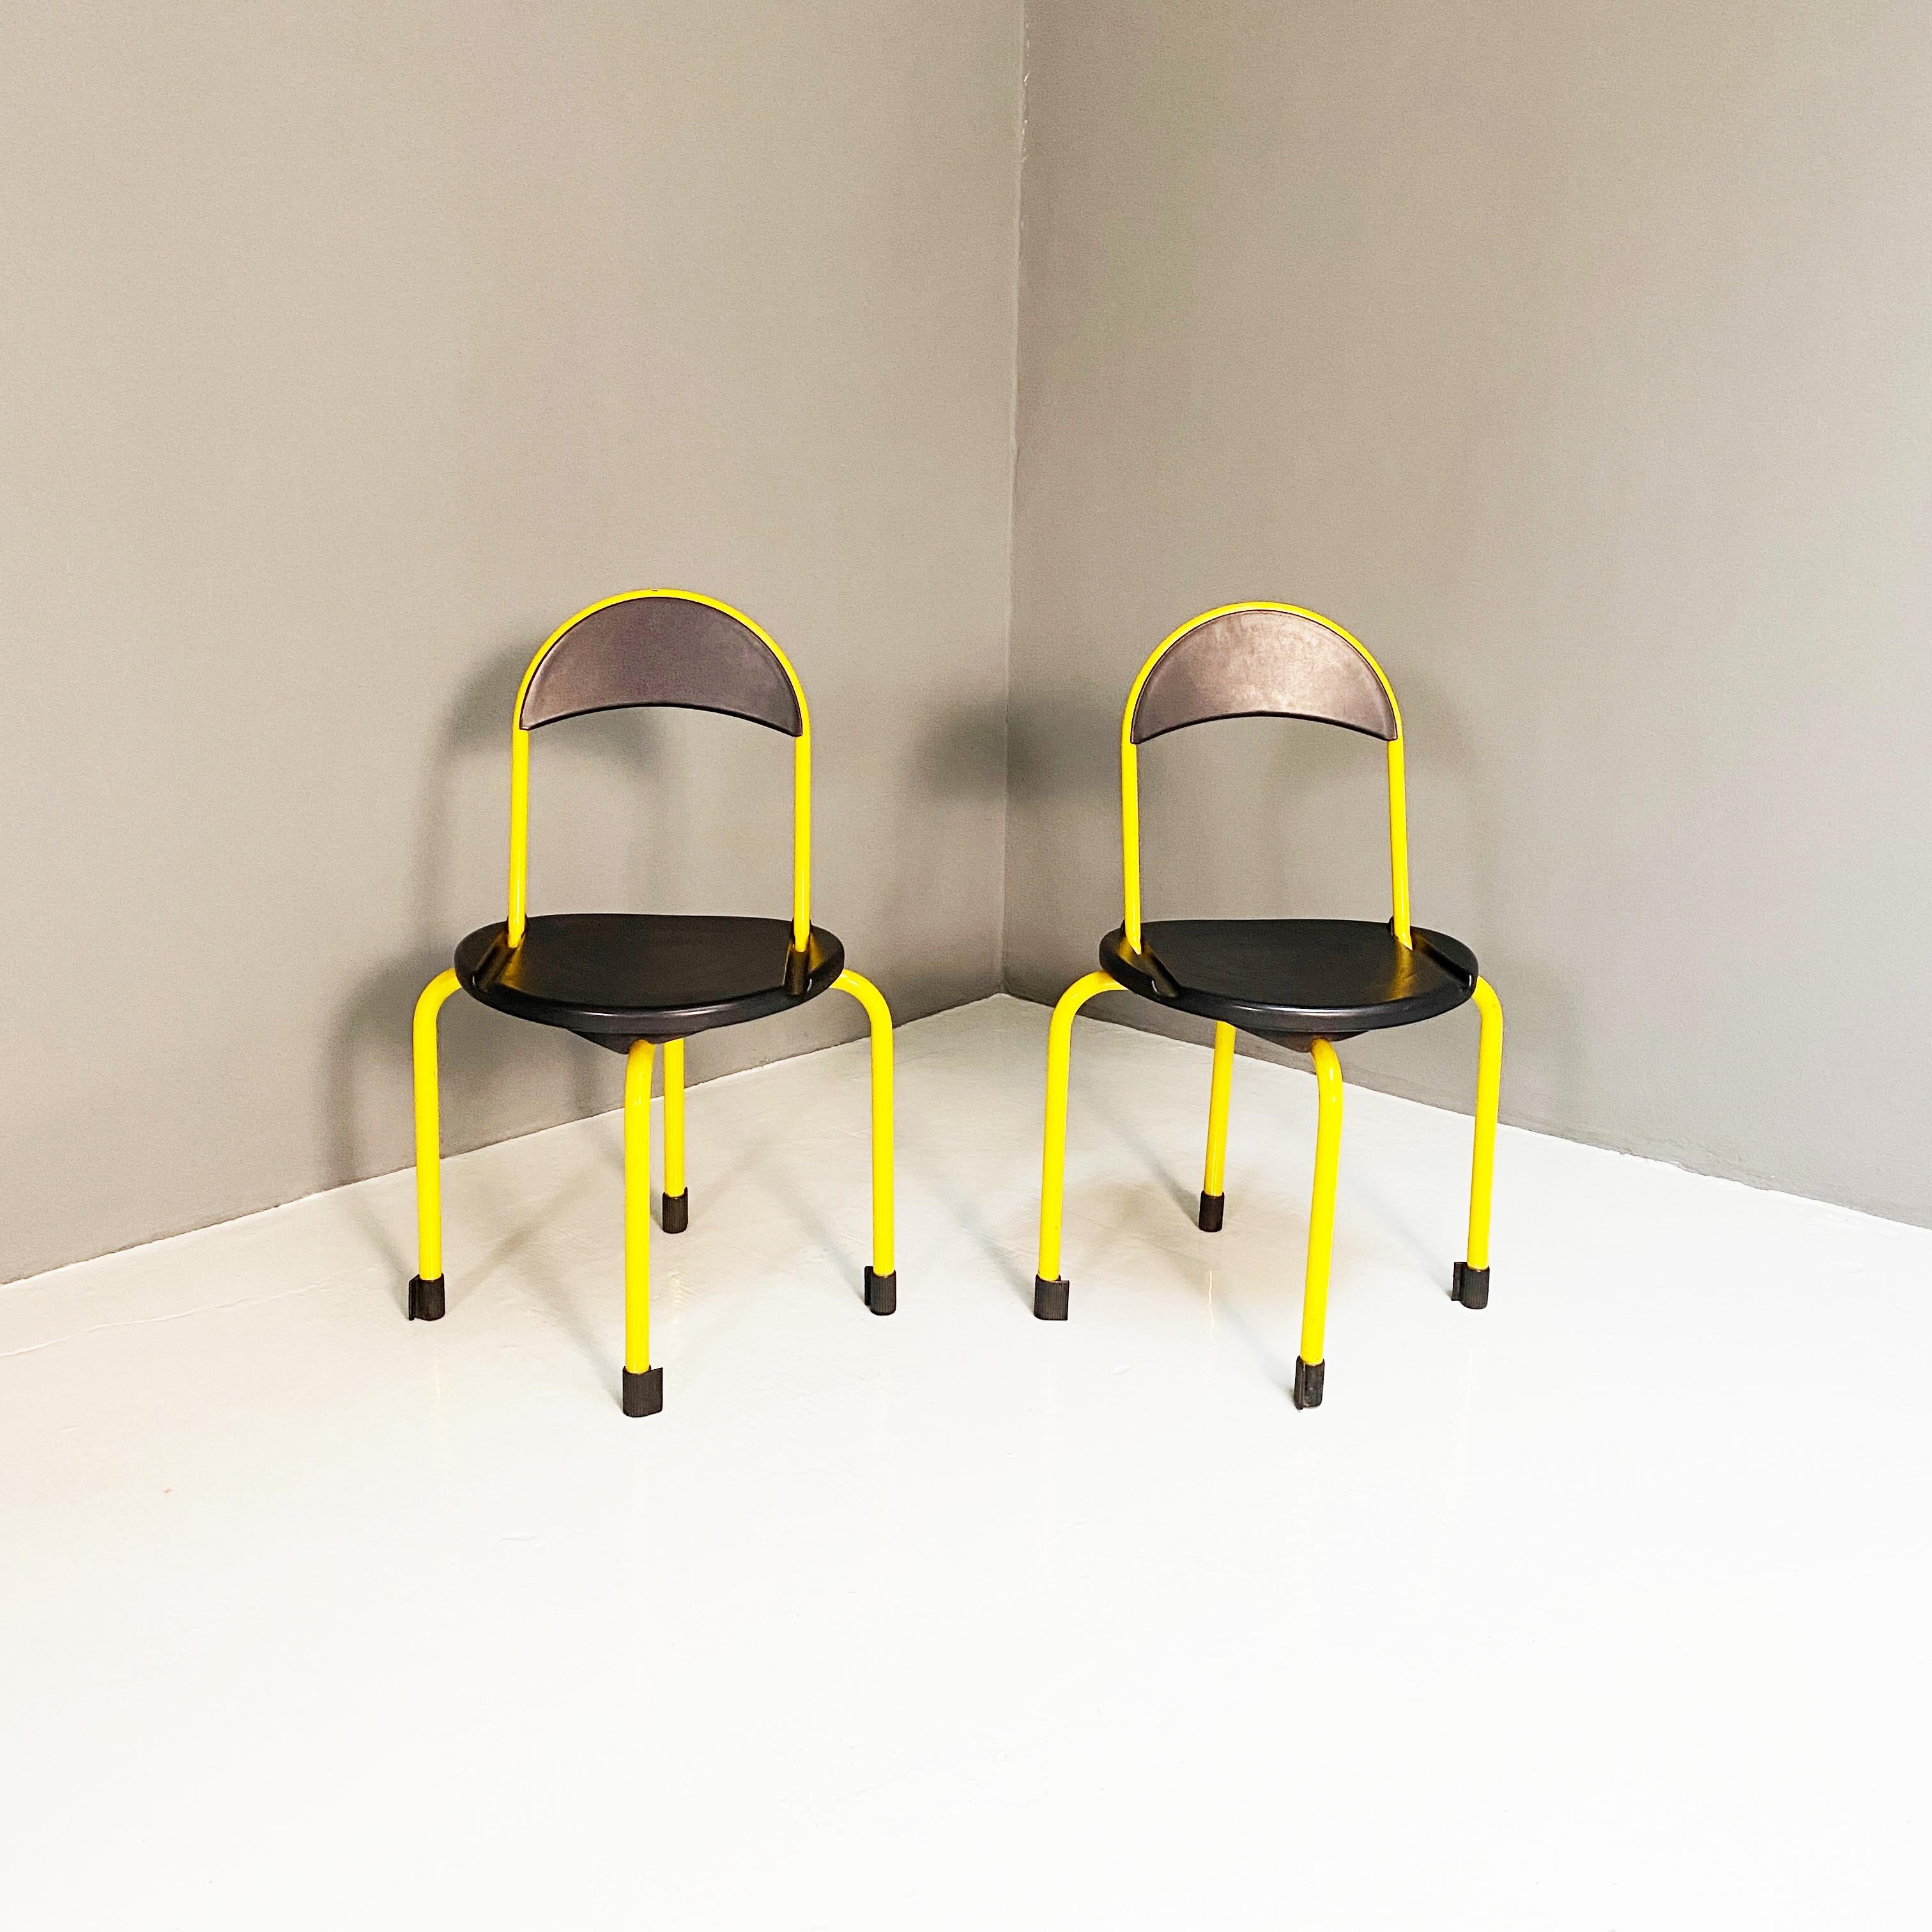 Folding plastic and metal seats by Lamm, 1980s
Folding seats with structure in yellow painted metal tubing and round seat and back in black plastic. Made by Lamm in the 1980s

Good conditions

Measurements in cm 48x53x84h